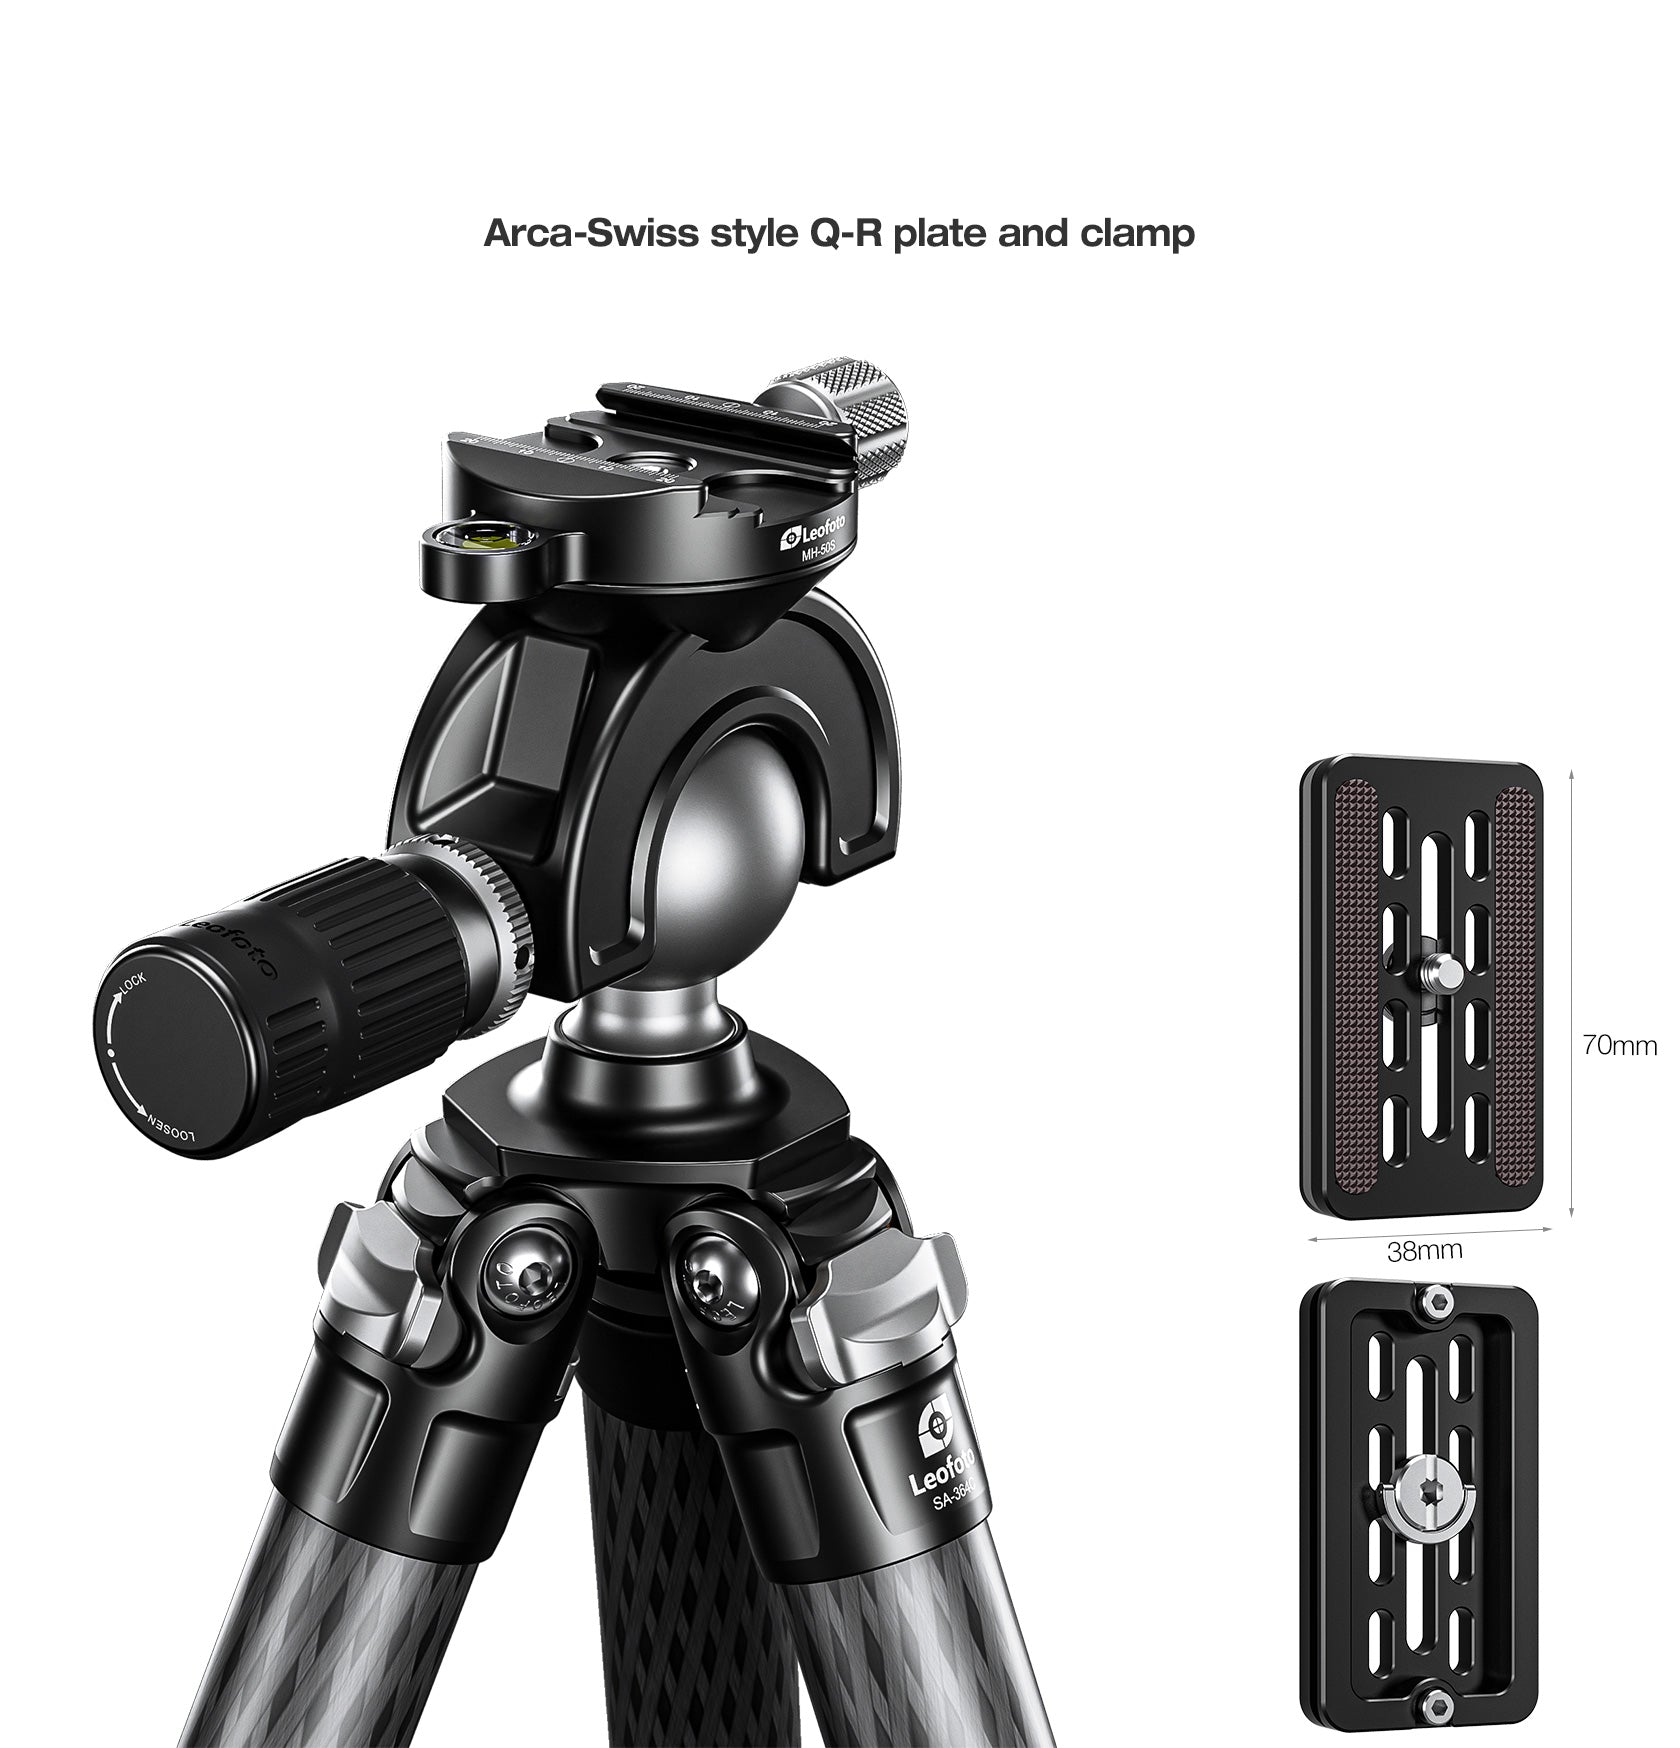 "Open Box" Leofoto MH-S Full Dynamic Ball Head /w Handlebar Control | M4 and 3/8'' Mounting Sockets | Arca Compatible